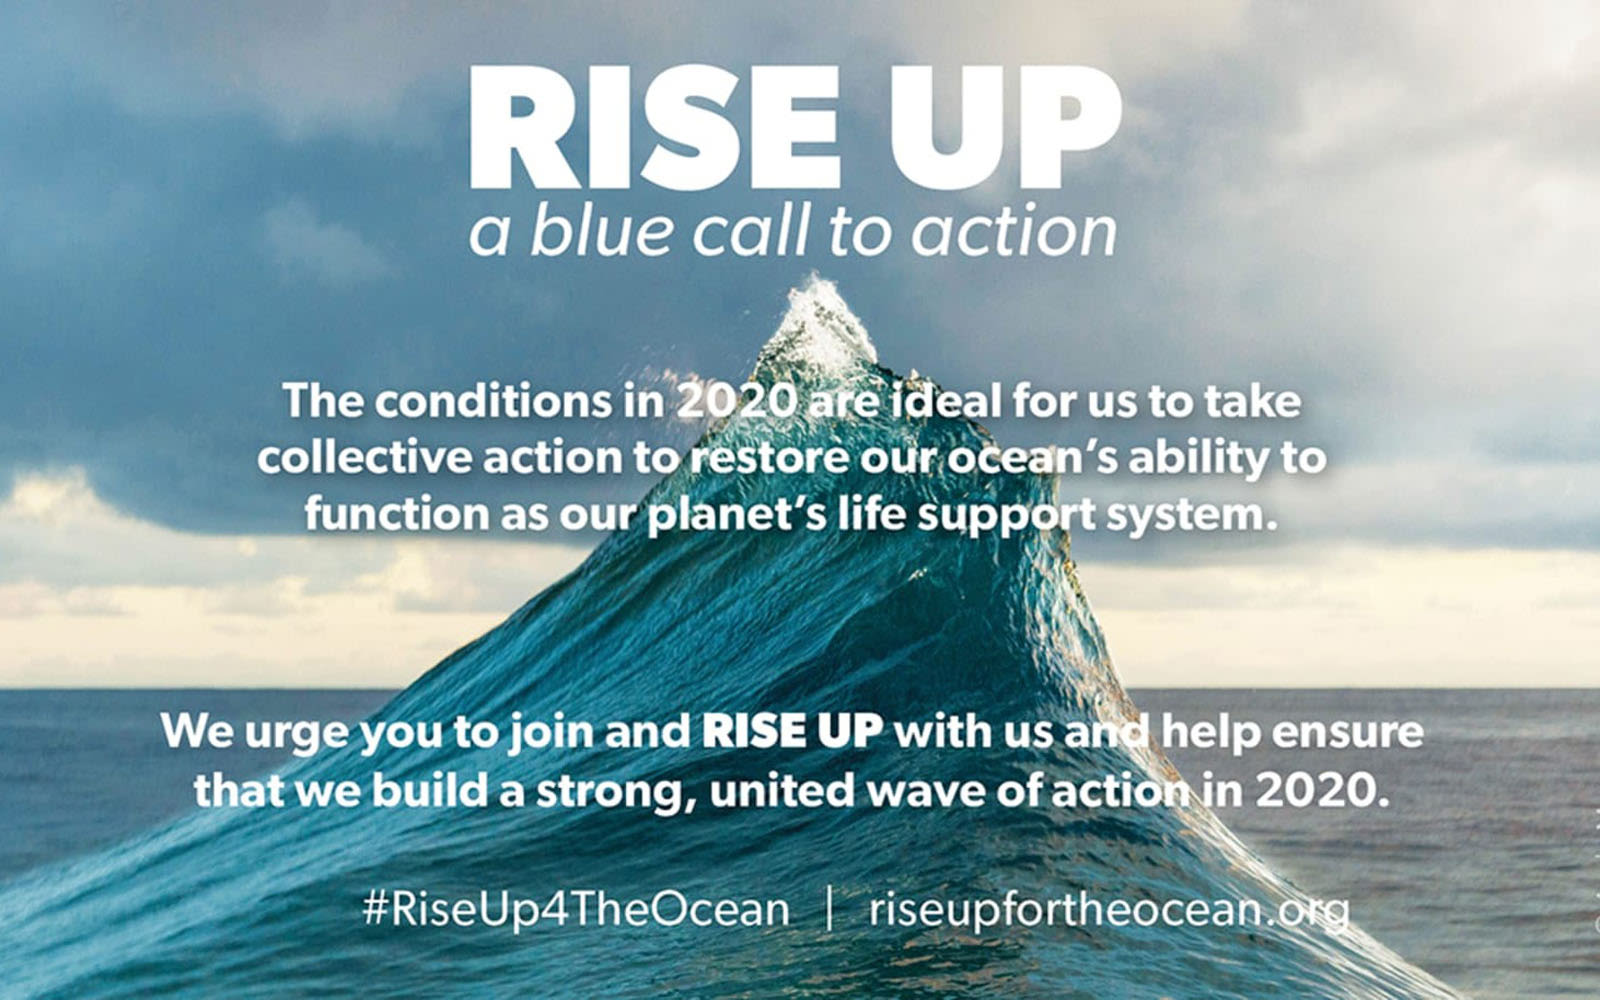 picture of a wave from rise up with a blue call to action information the image 